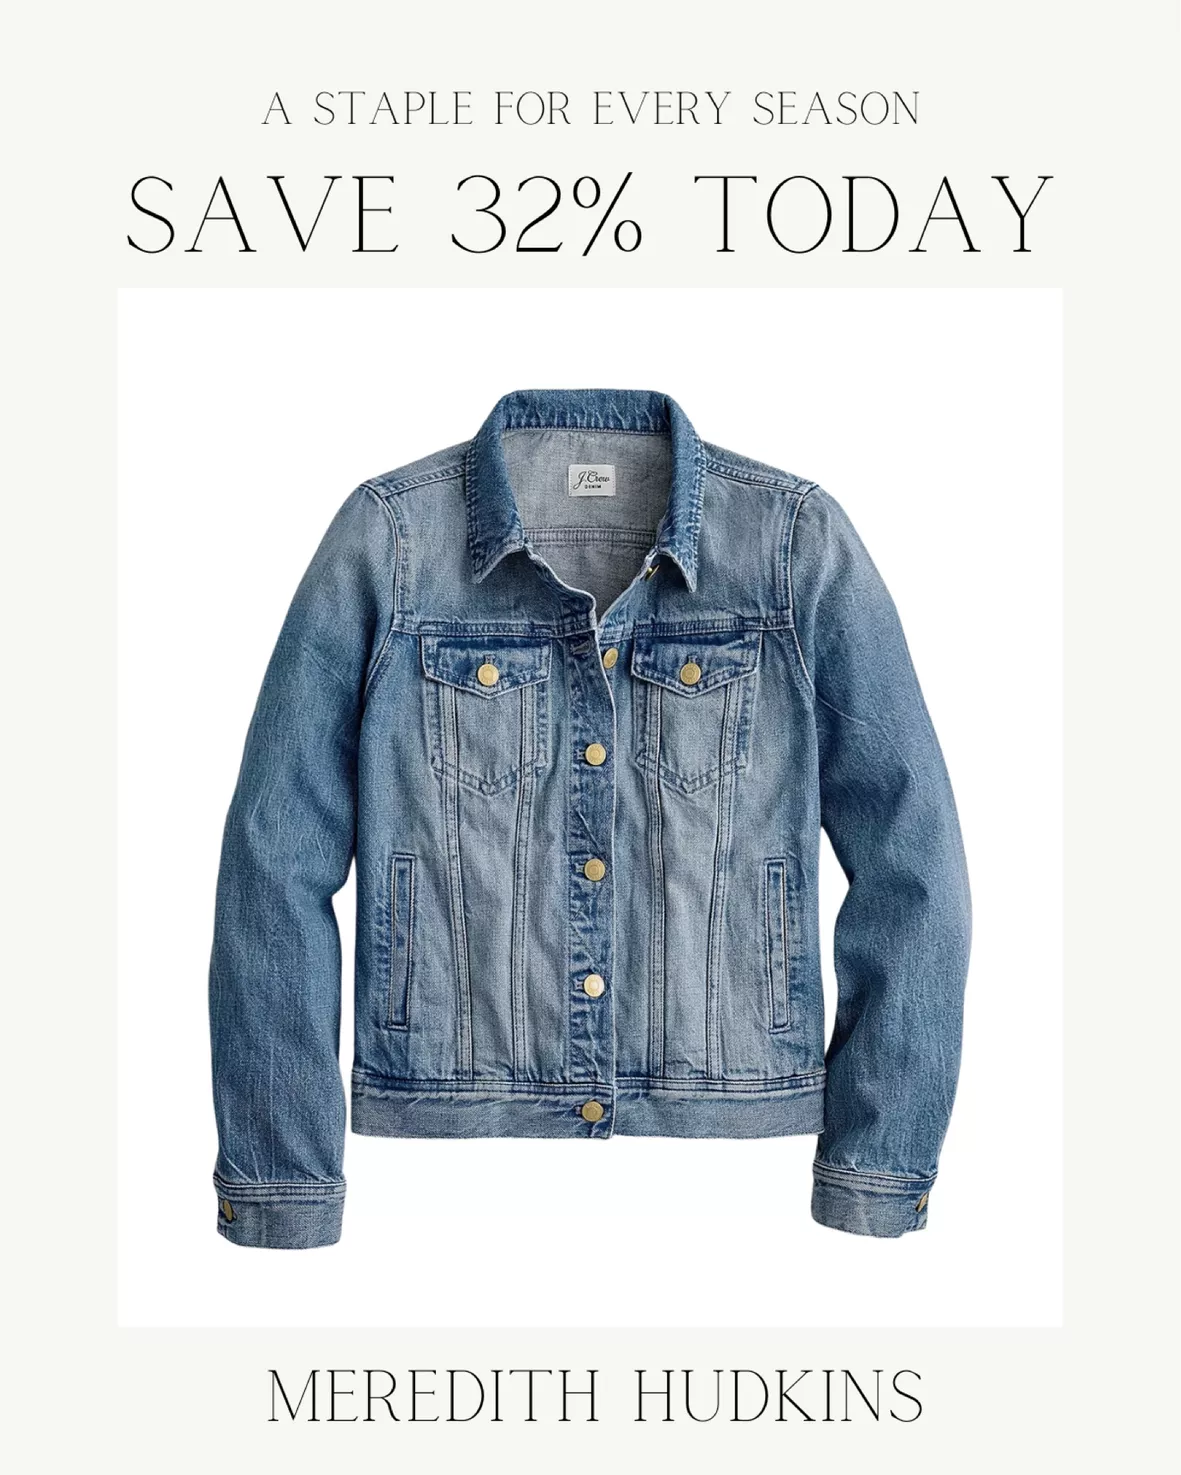 A denim jacket is a wardrobe staple. - Chic at any age